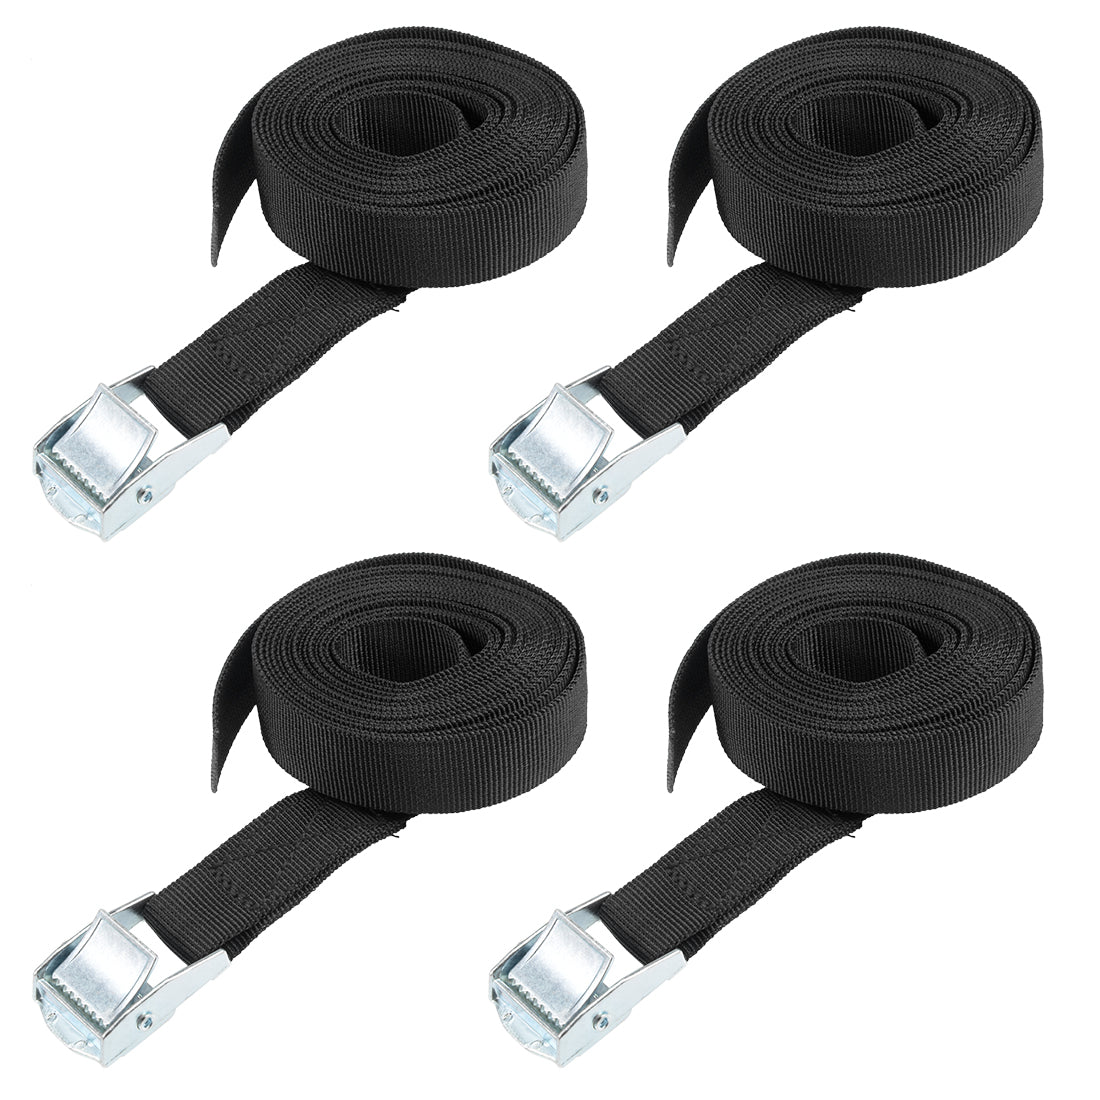 uxcell Uxcell 3 Meters x 25mm Lashing Strap Cargo Tie Down Straps Buckle Up to 80Kg Black 4Pcs